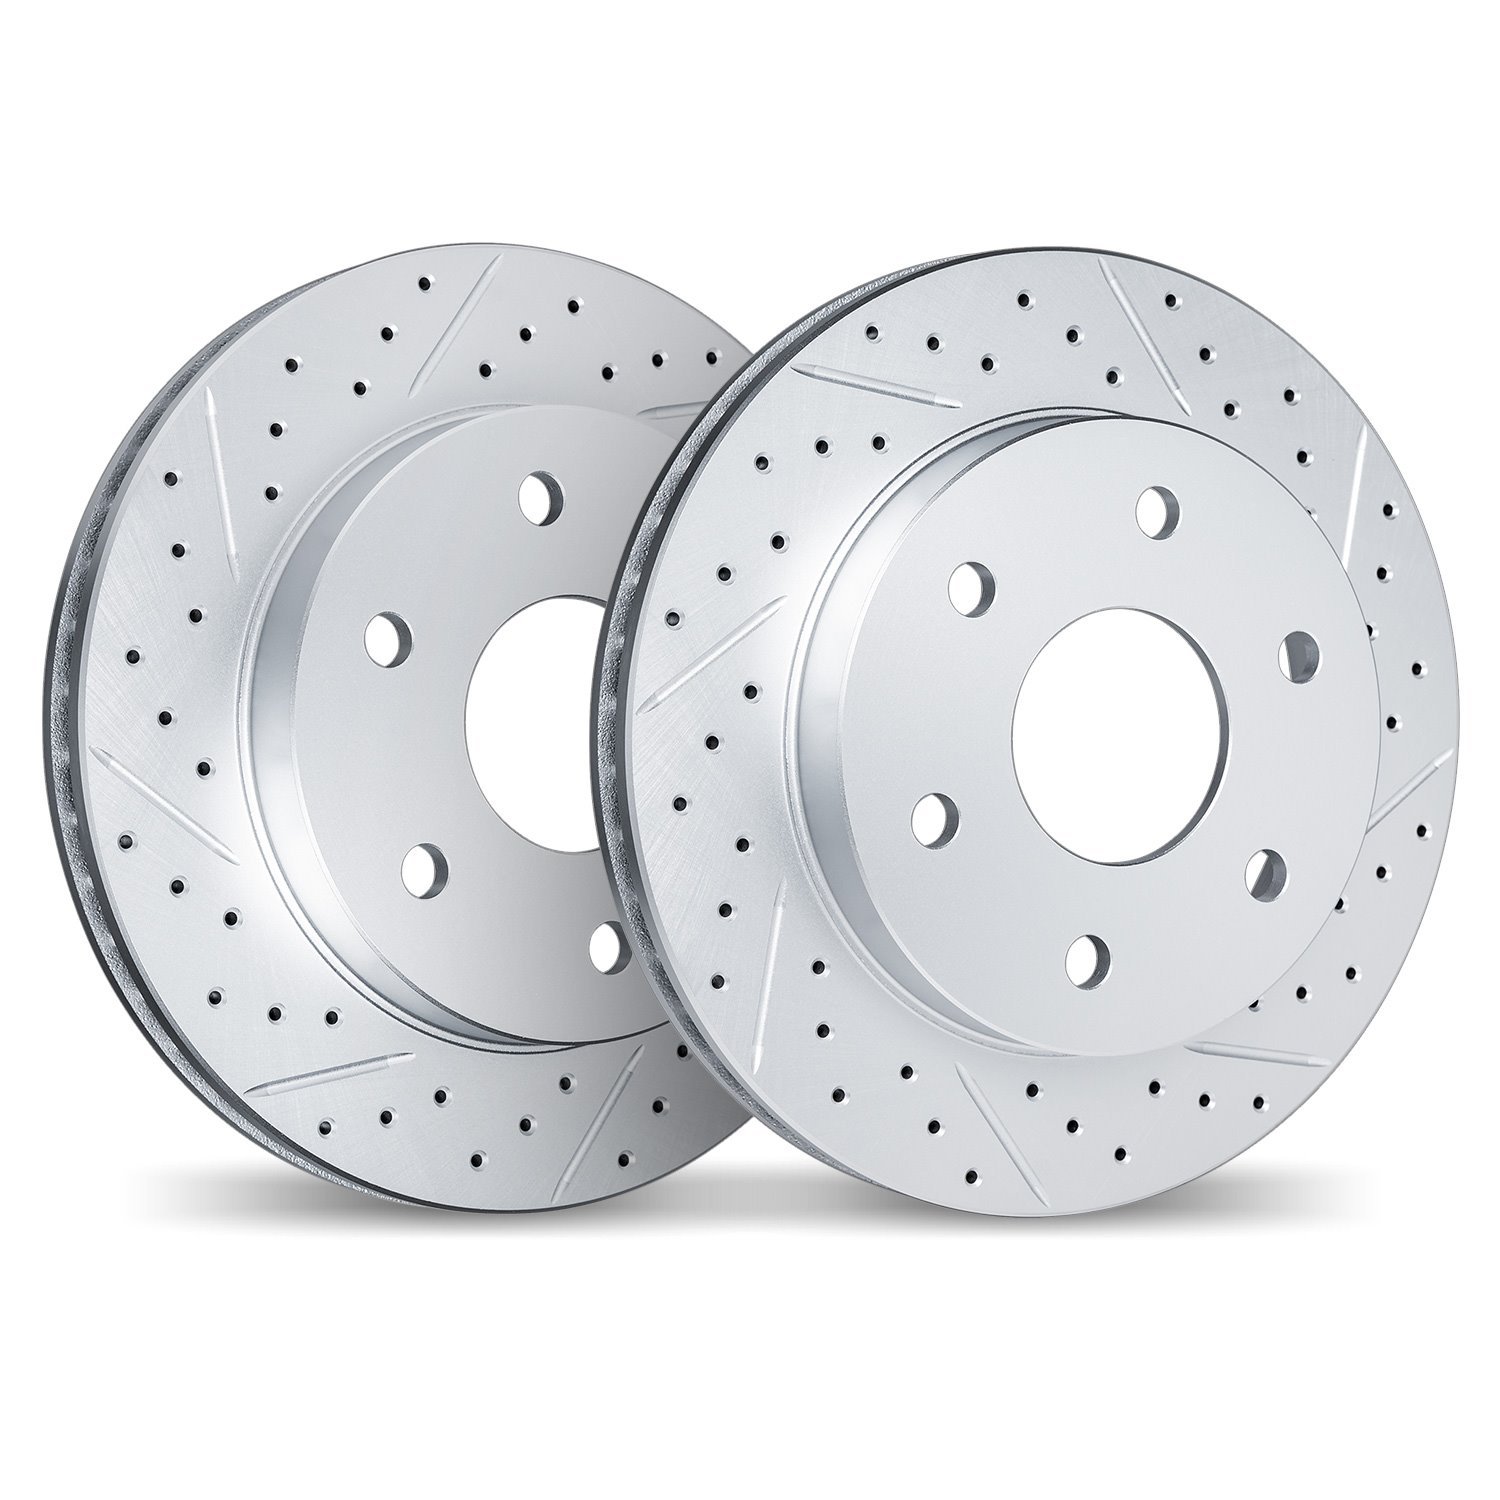 2002-54178 Geoperformance Drilled/Slotted Brake Rotors, Fits Select Ford/Lincoln/Mercury/Mazda, Position: Rear